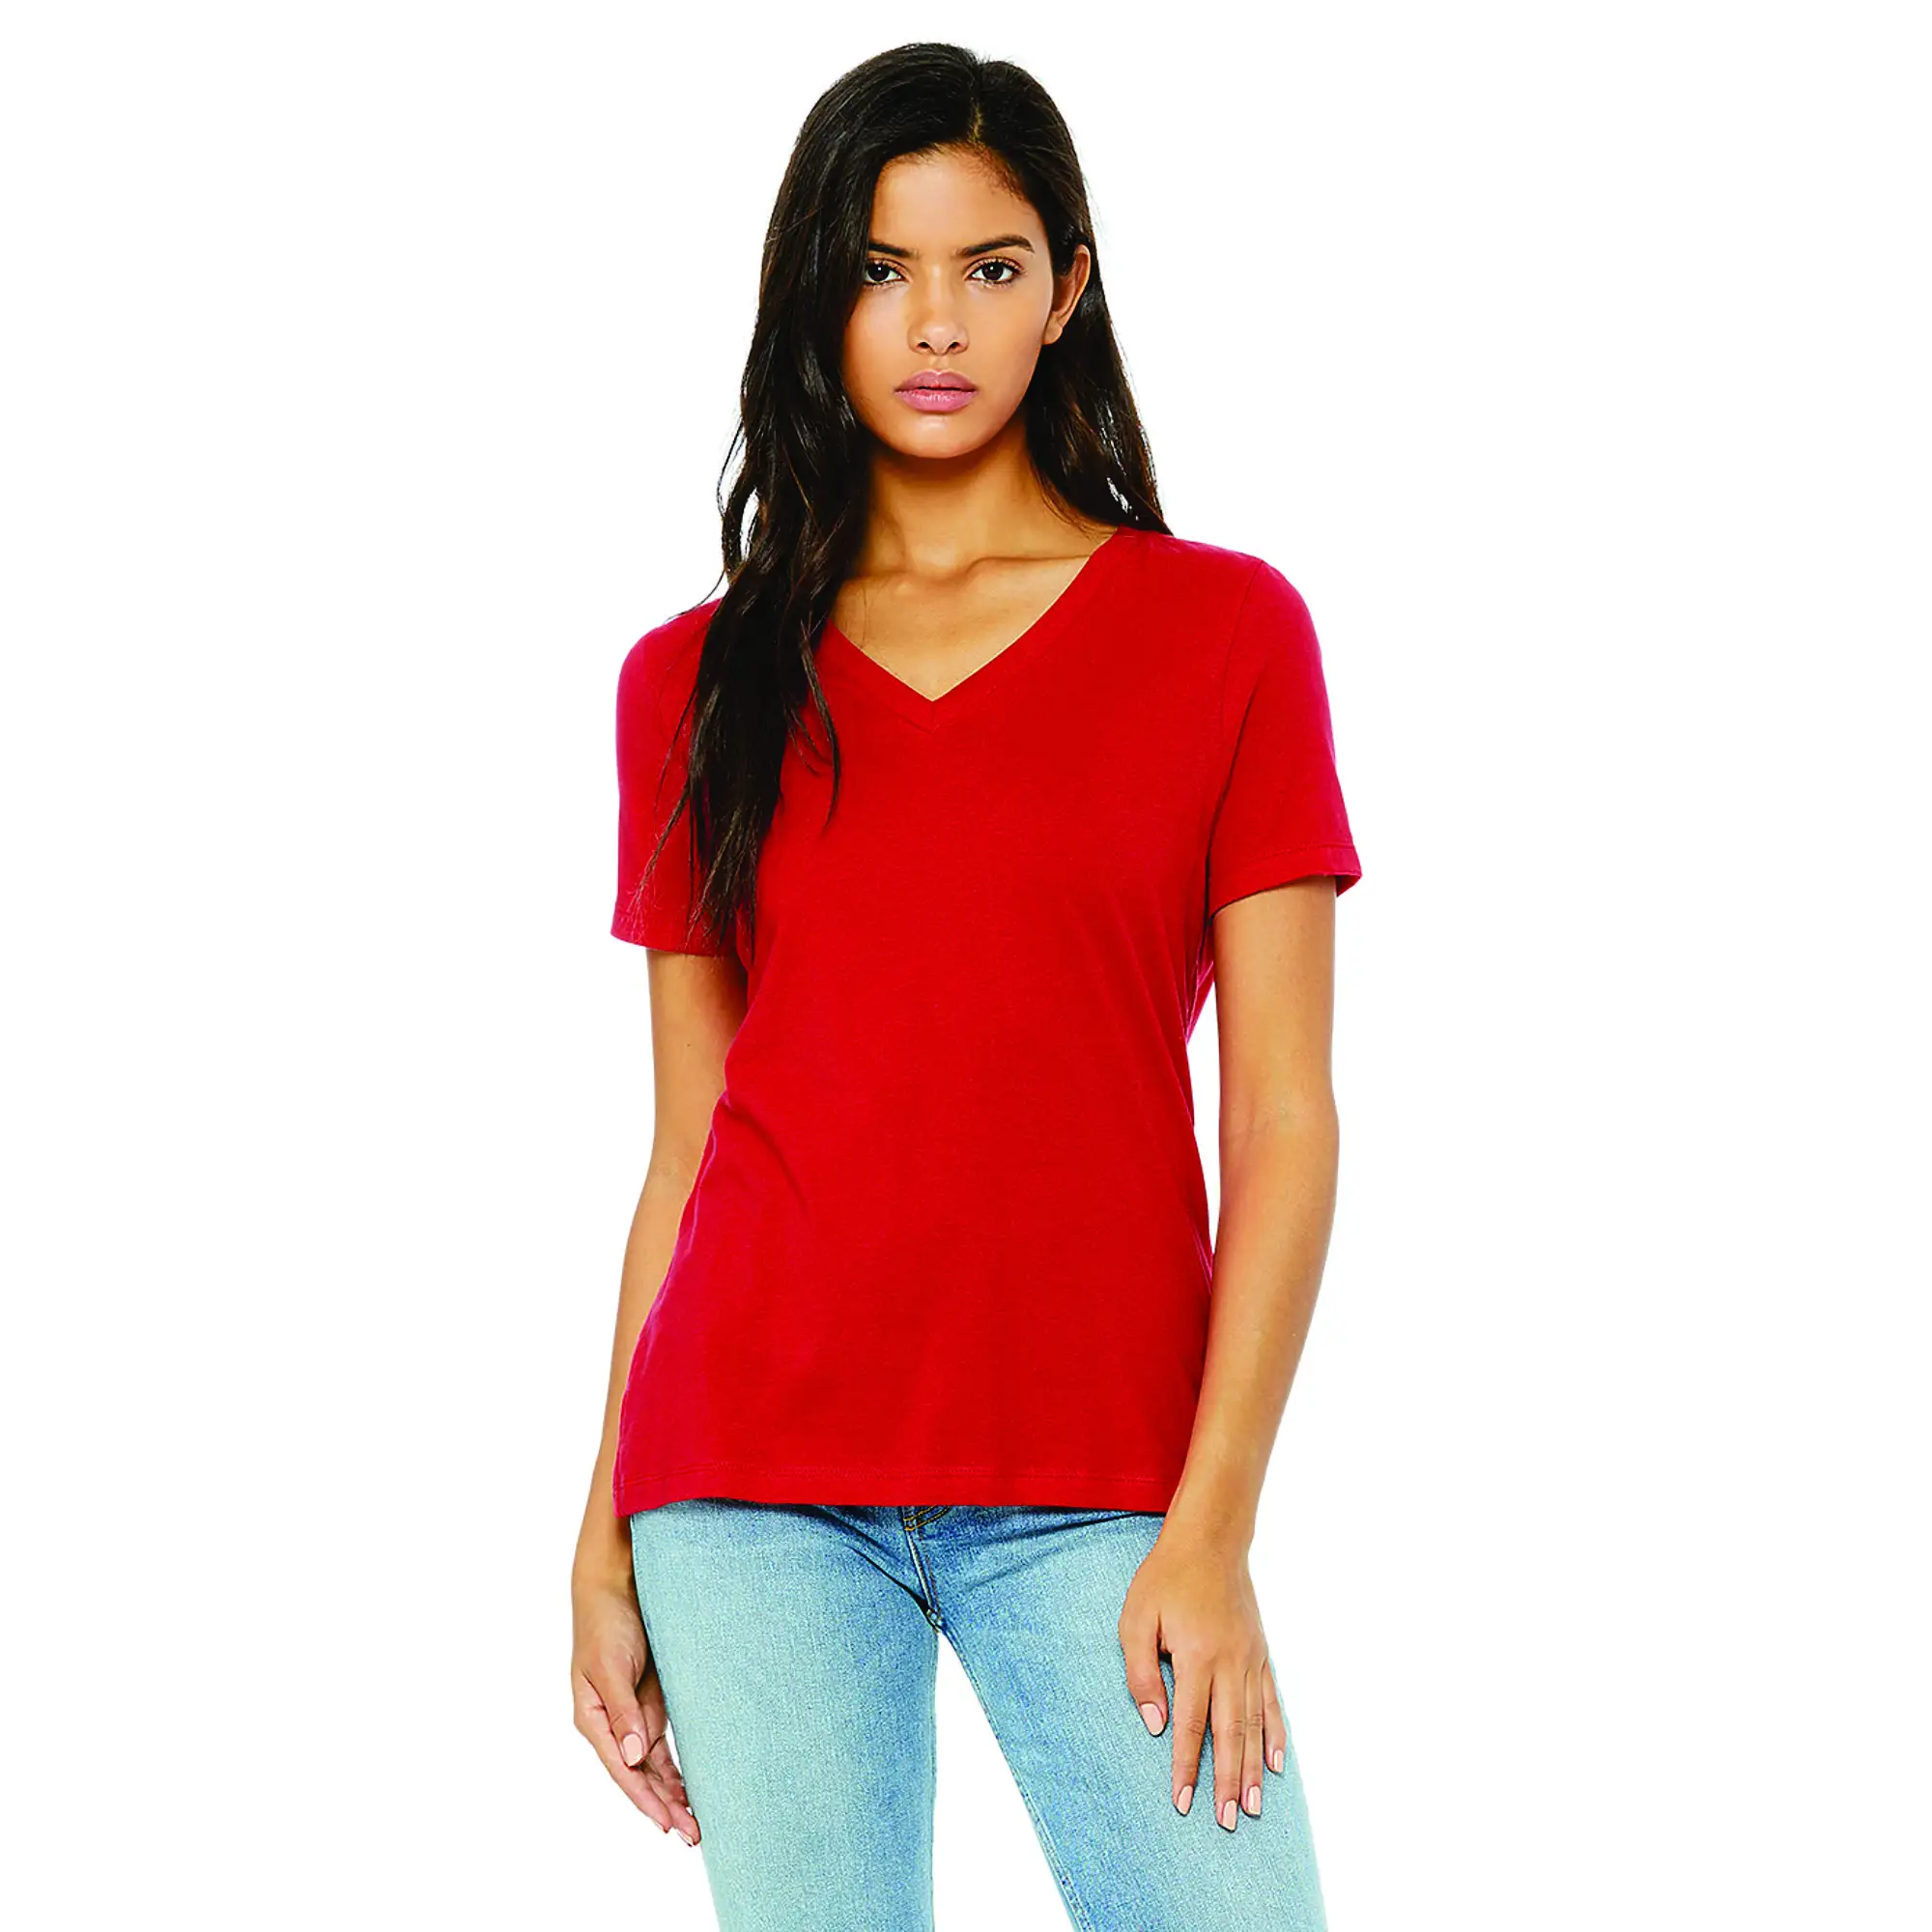 100% Airlume Combed and Ring Spun Cotton 32 Single 4.2 oz Red Womens Relaxed Jersey Short Sleeve V-Neck T-Shirt